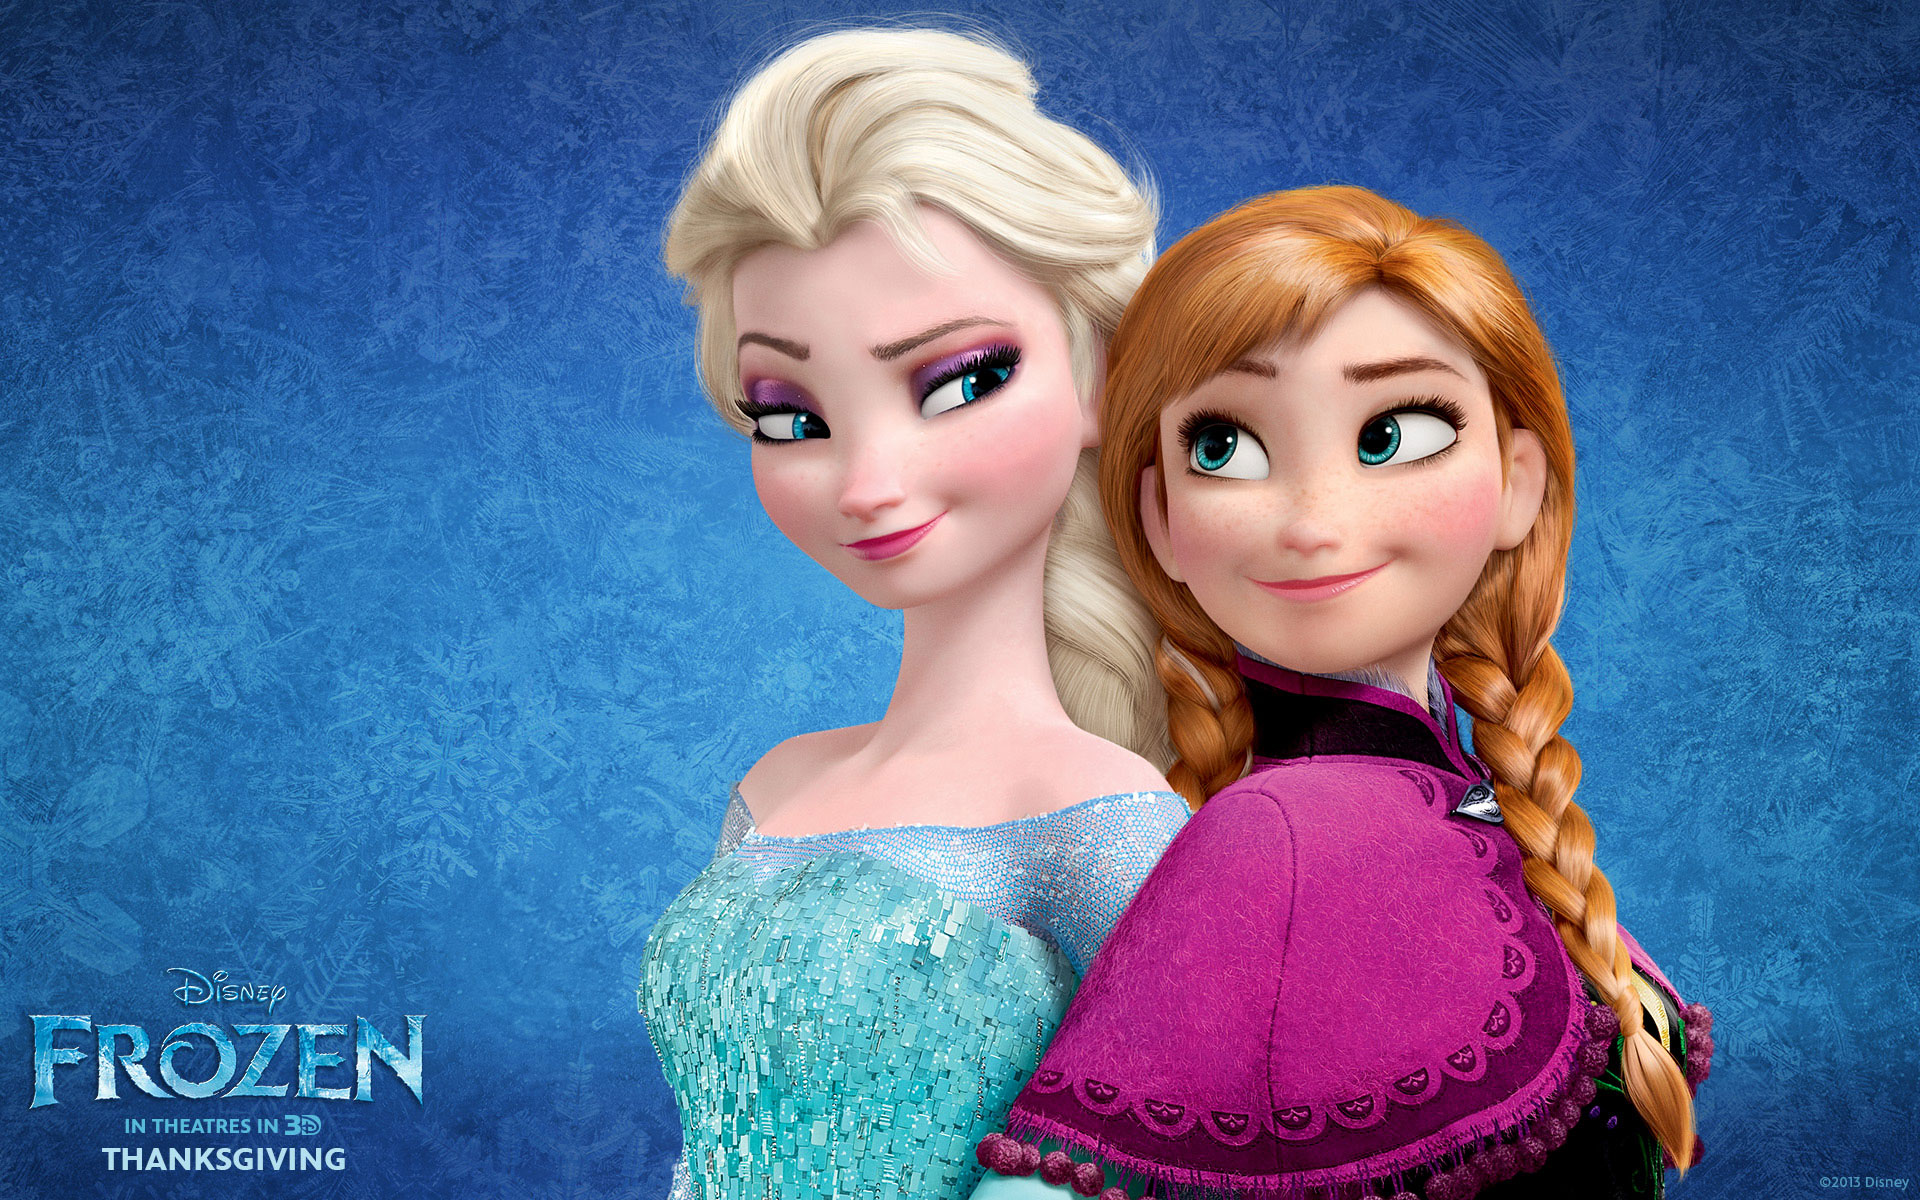  movie wallpapers hd collection frozen movie anna elsa hd wallpaper